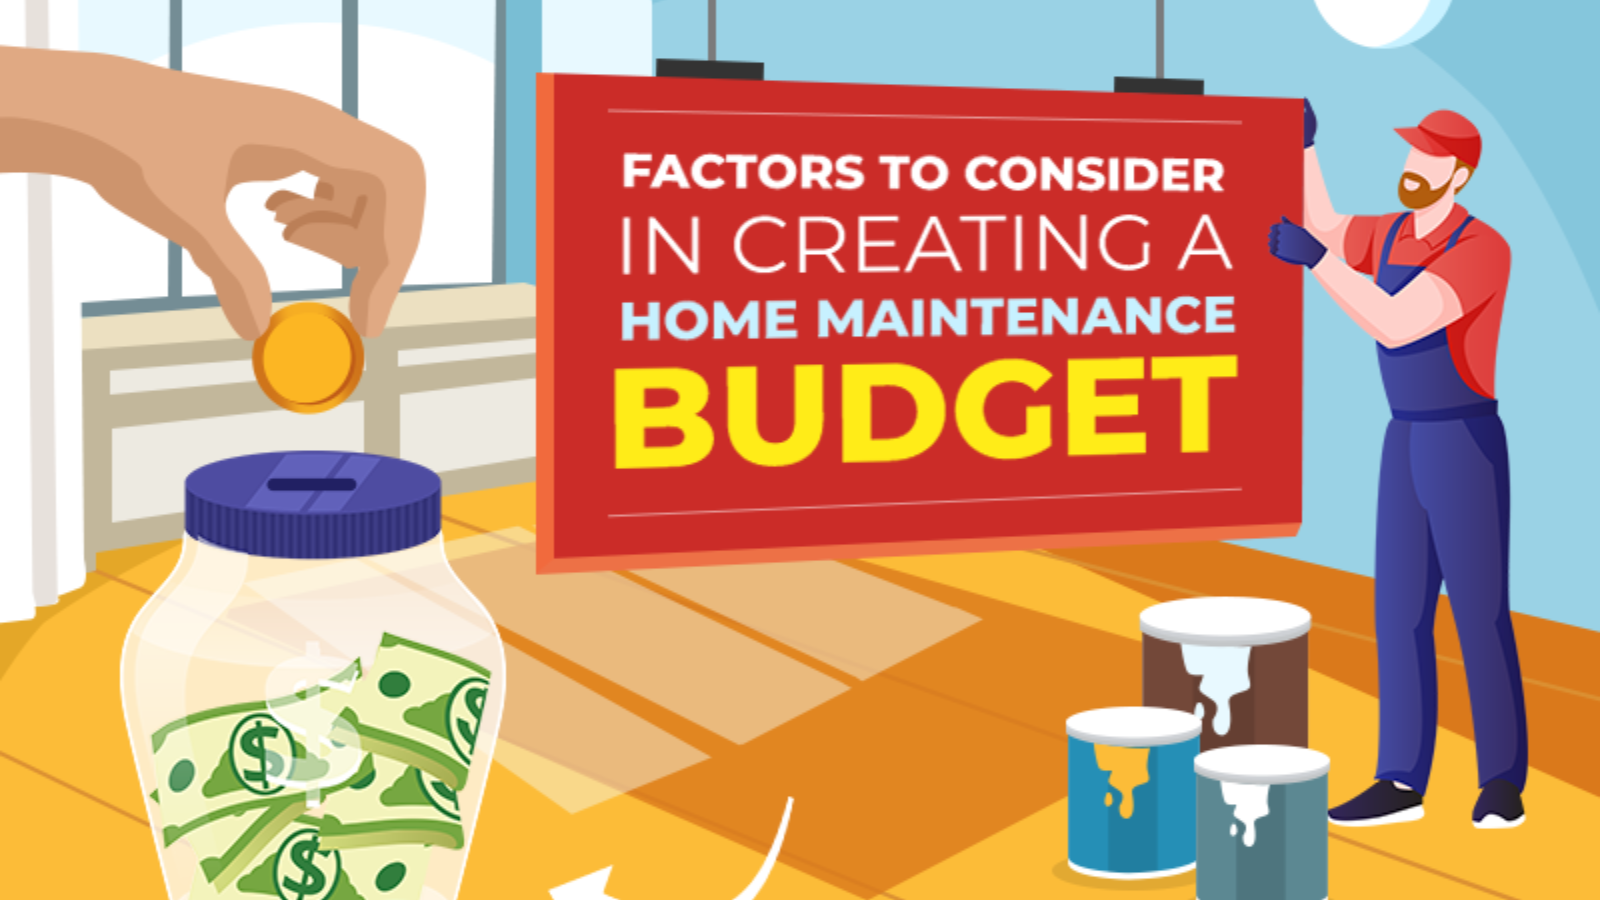 How Much Should You Set Aside For Home Maintenance? Factors To Consider In Creating A Budget